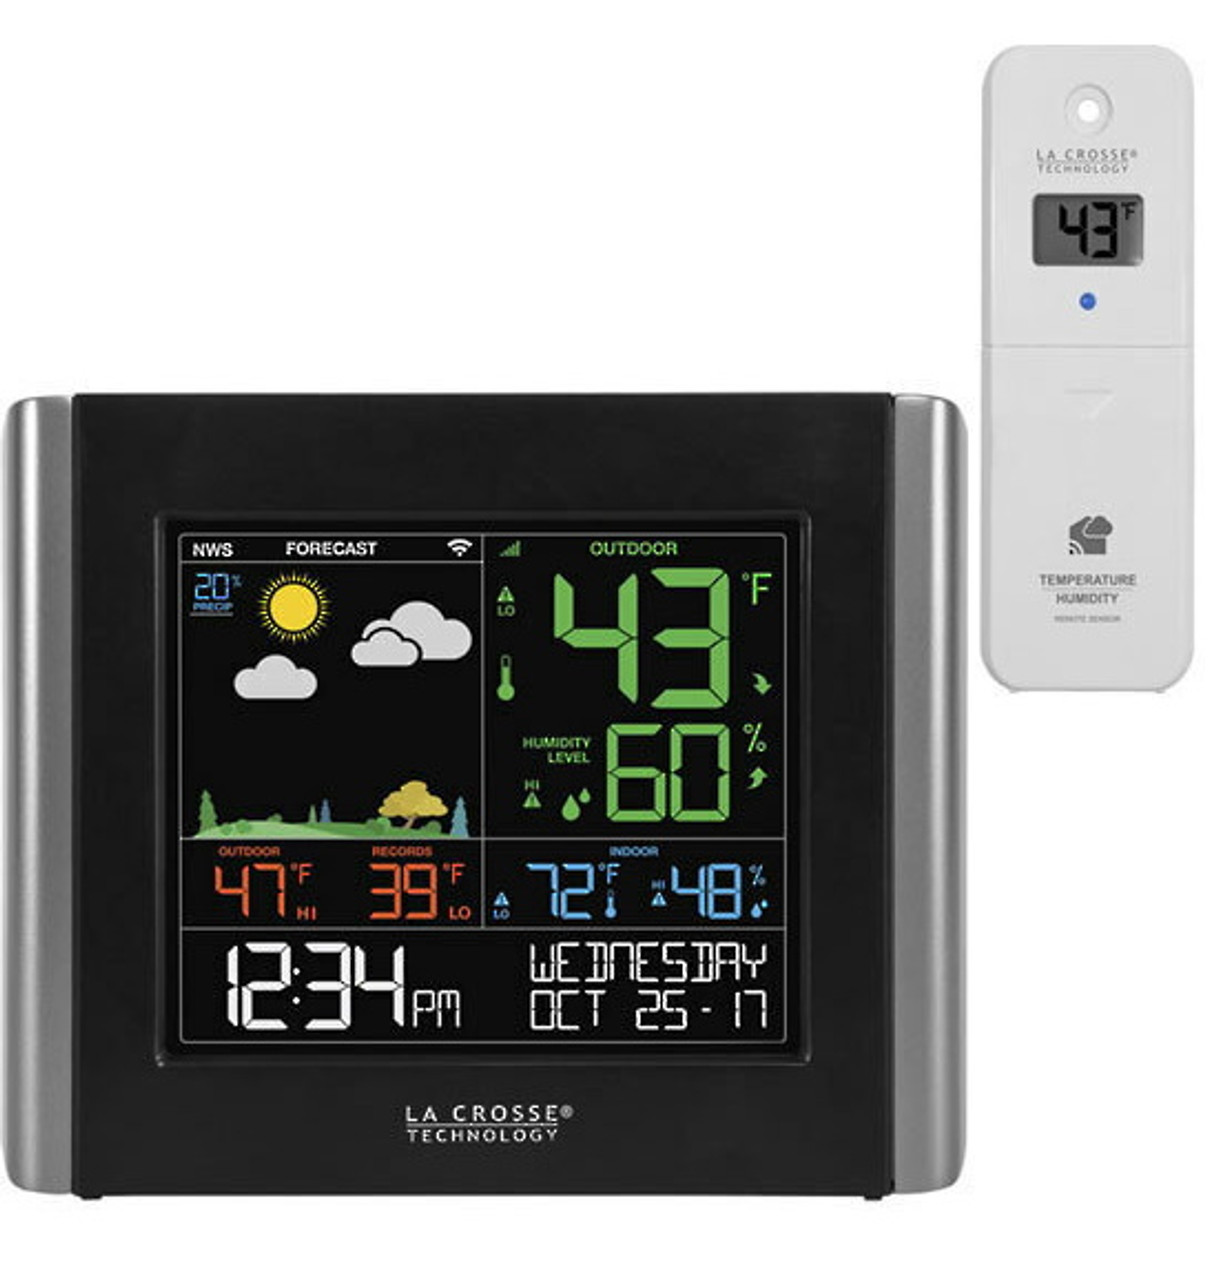 Thermostat & Weather Station